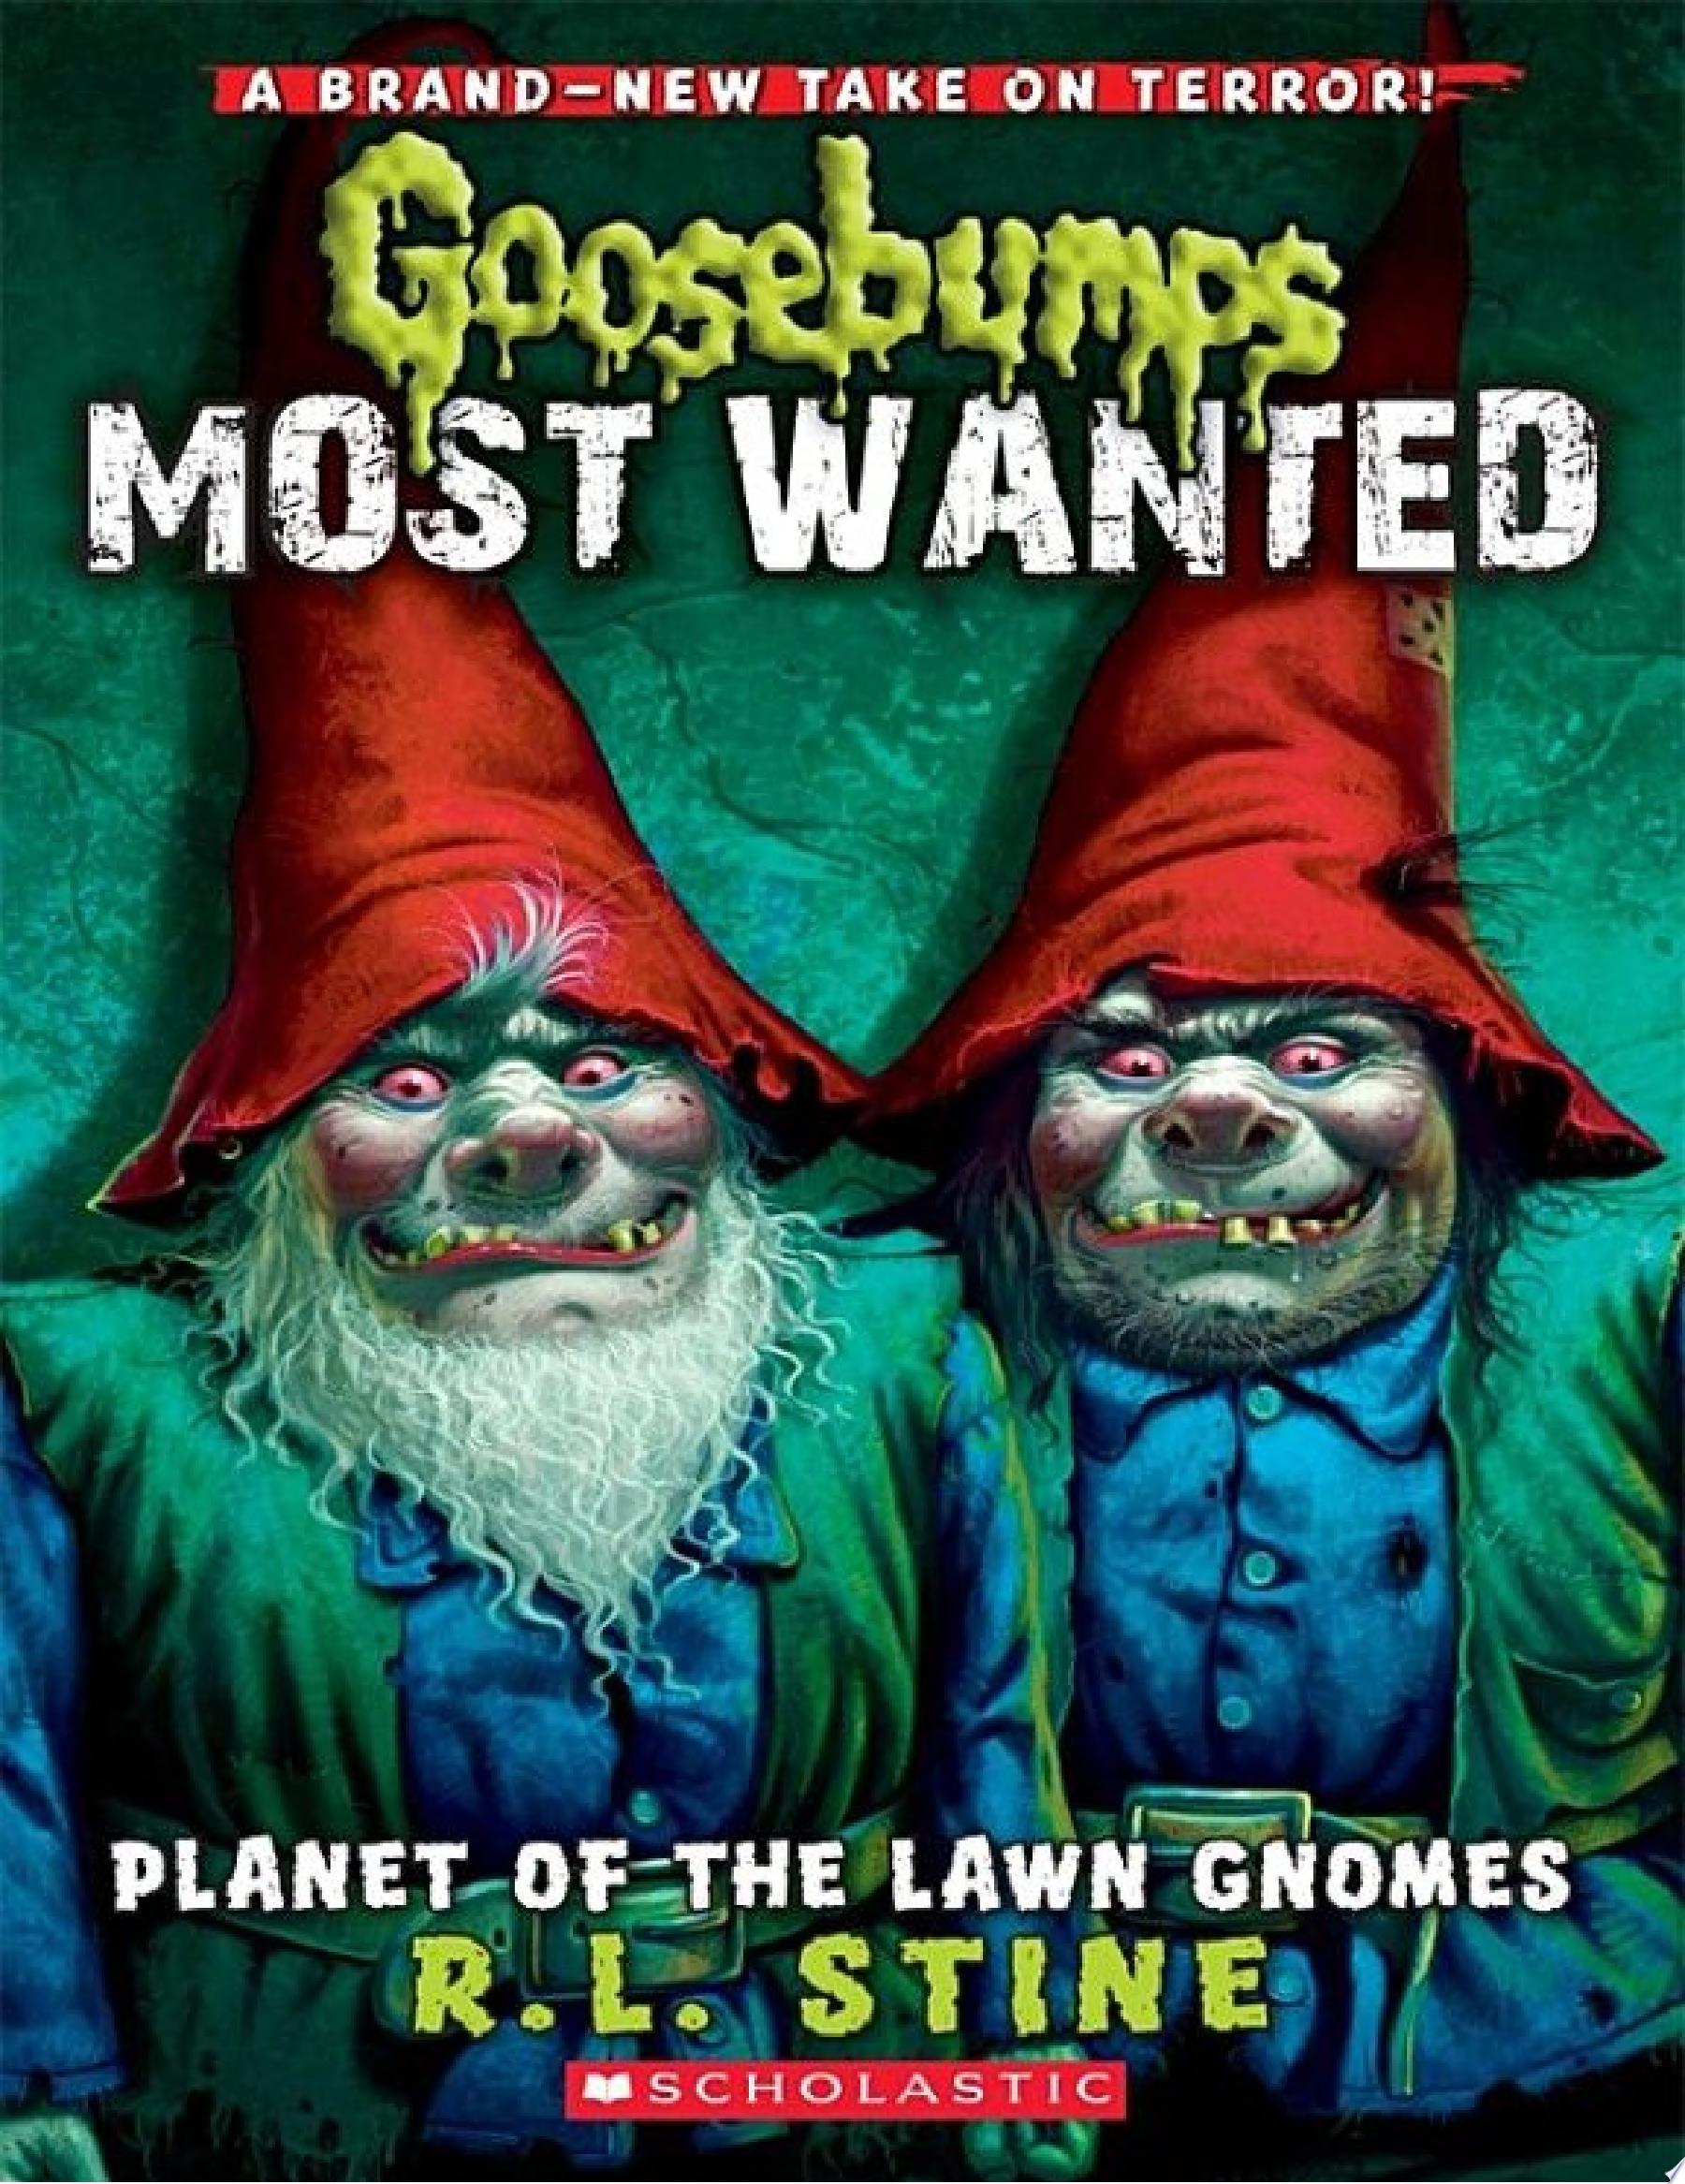 Image for "Planet of the Lawn Gnomes (Goosebumps Most Wanted #1)"